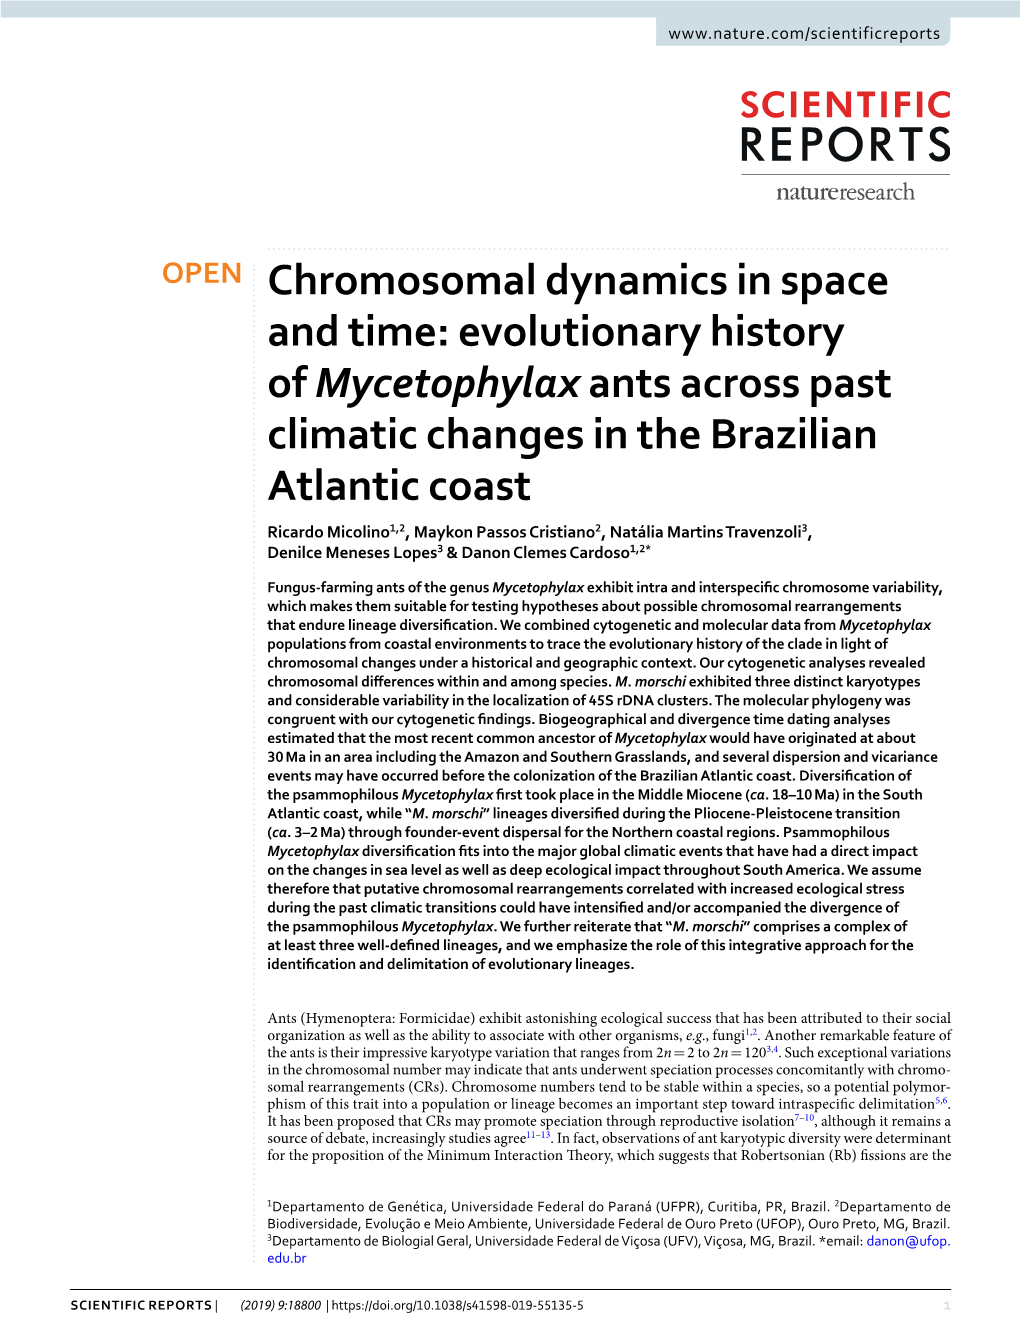 Evolutionary History of Mycetophylax Ants Across Past Climatic Changes In